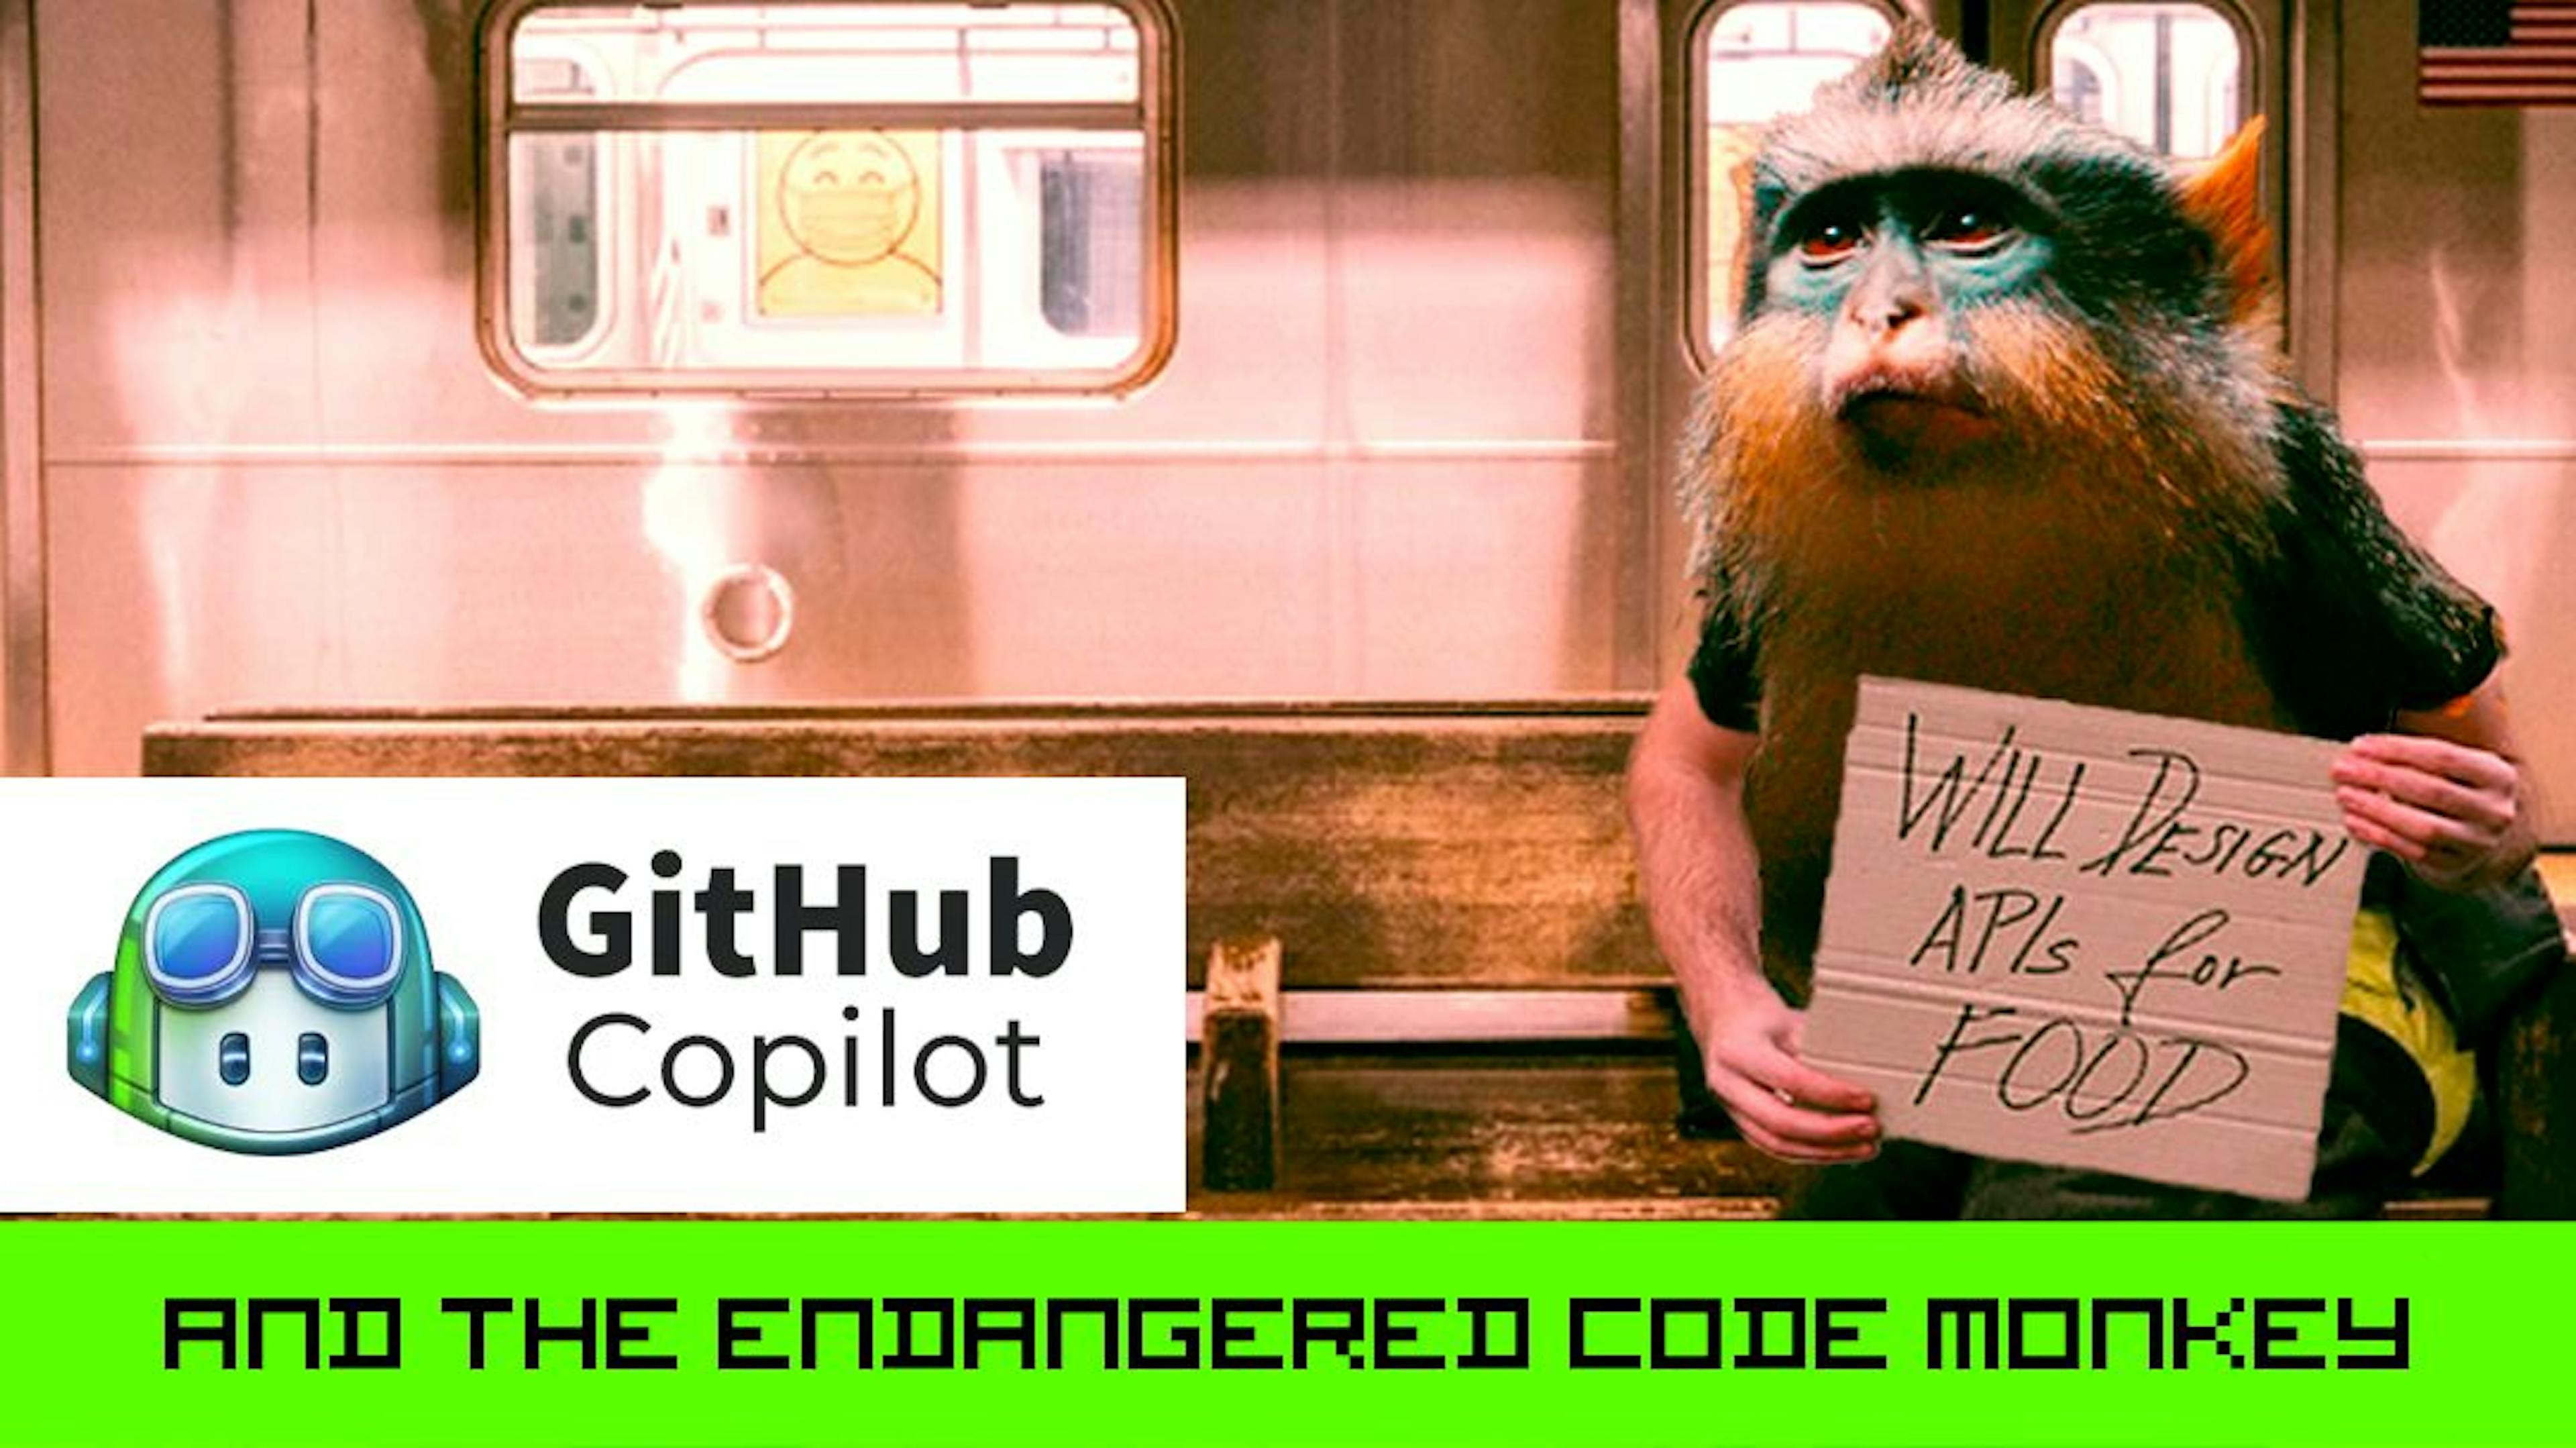 featured image - GitHub Copilot and the Endangered Code Monkey